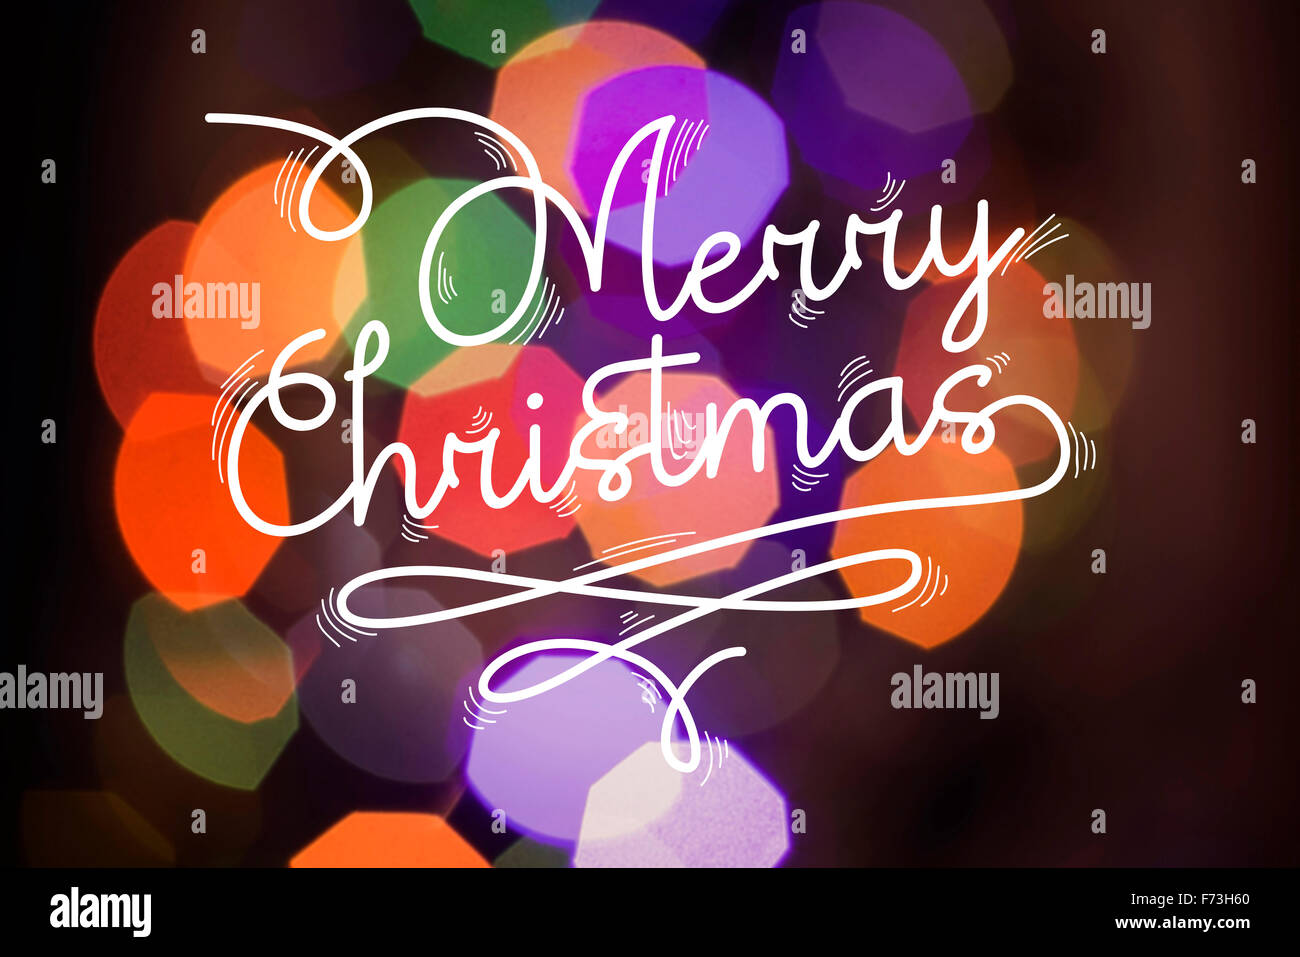 Merry christmas greeting card: colorful blur light background with xmas text and hand drawn lines. Ideal for holiday poster Stock Photo